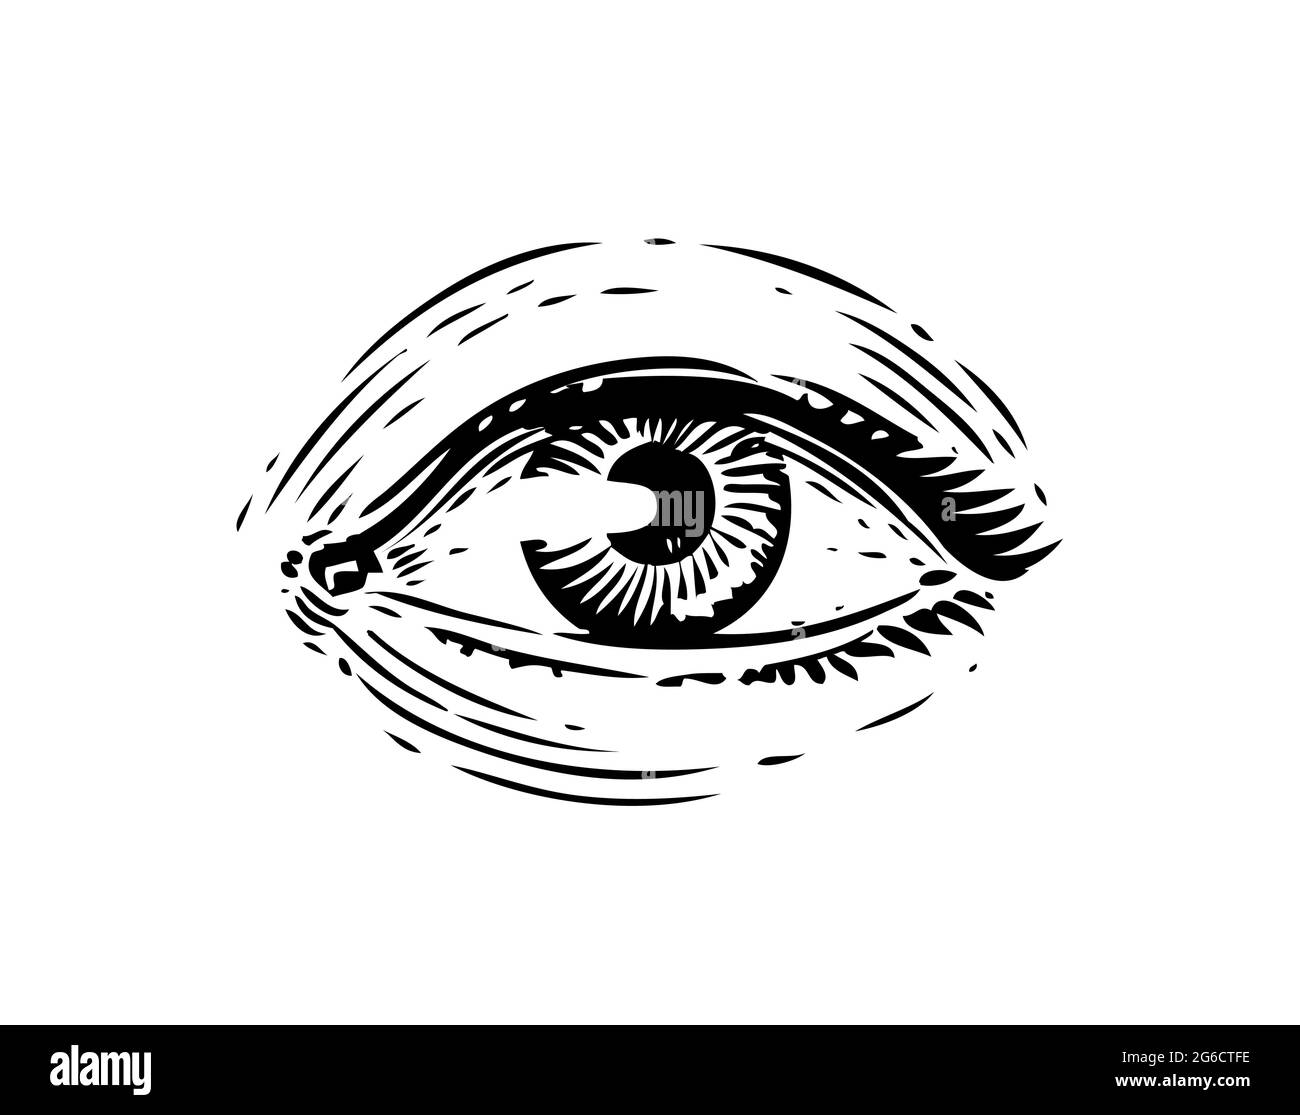 Human eye vintage sketch. Hand drawn illustration in engraving style Stock Vector